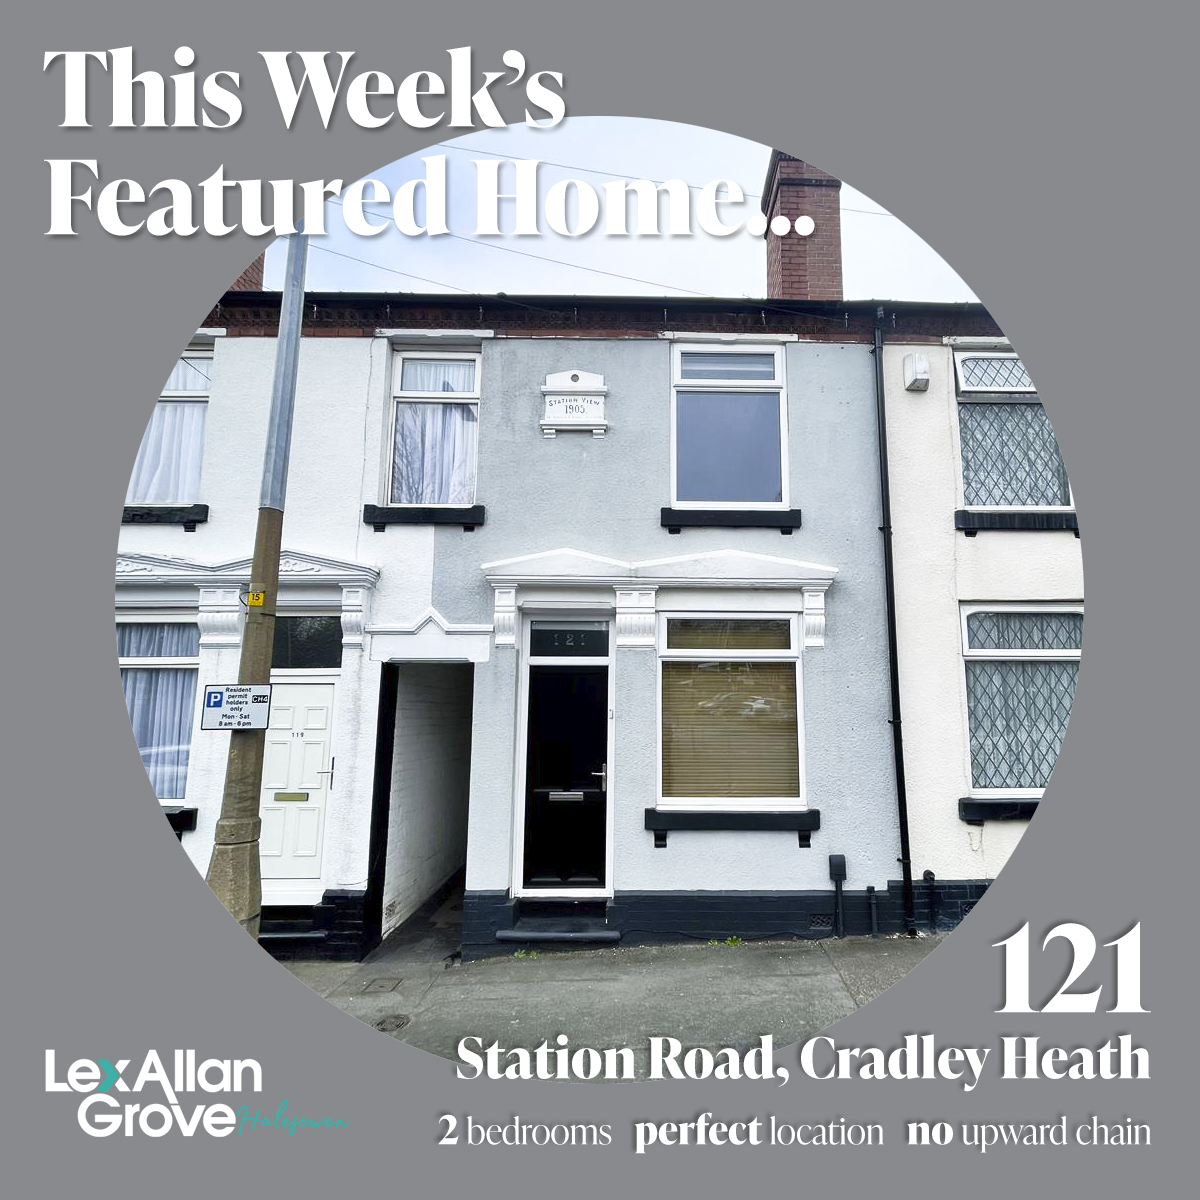 This Week’s Featured Home: 121 Station Road, Cradley Heath
2 bed, perfect location, NO UPWARD CHAIN!
Call 0121 550 5400
#estateagents #property #live #homesweethome #buy #sell #DoingThingsDifferently #Halesowen #CradleyHeath #BlackCountry #westmidlands 
lexallan.co.uk/property/2-bed…